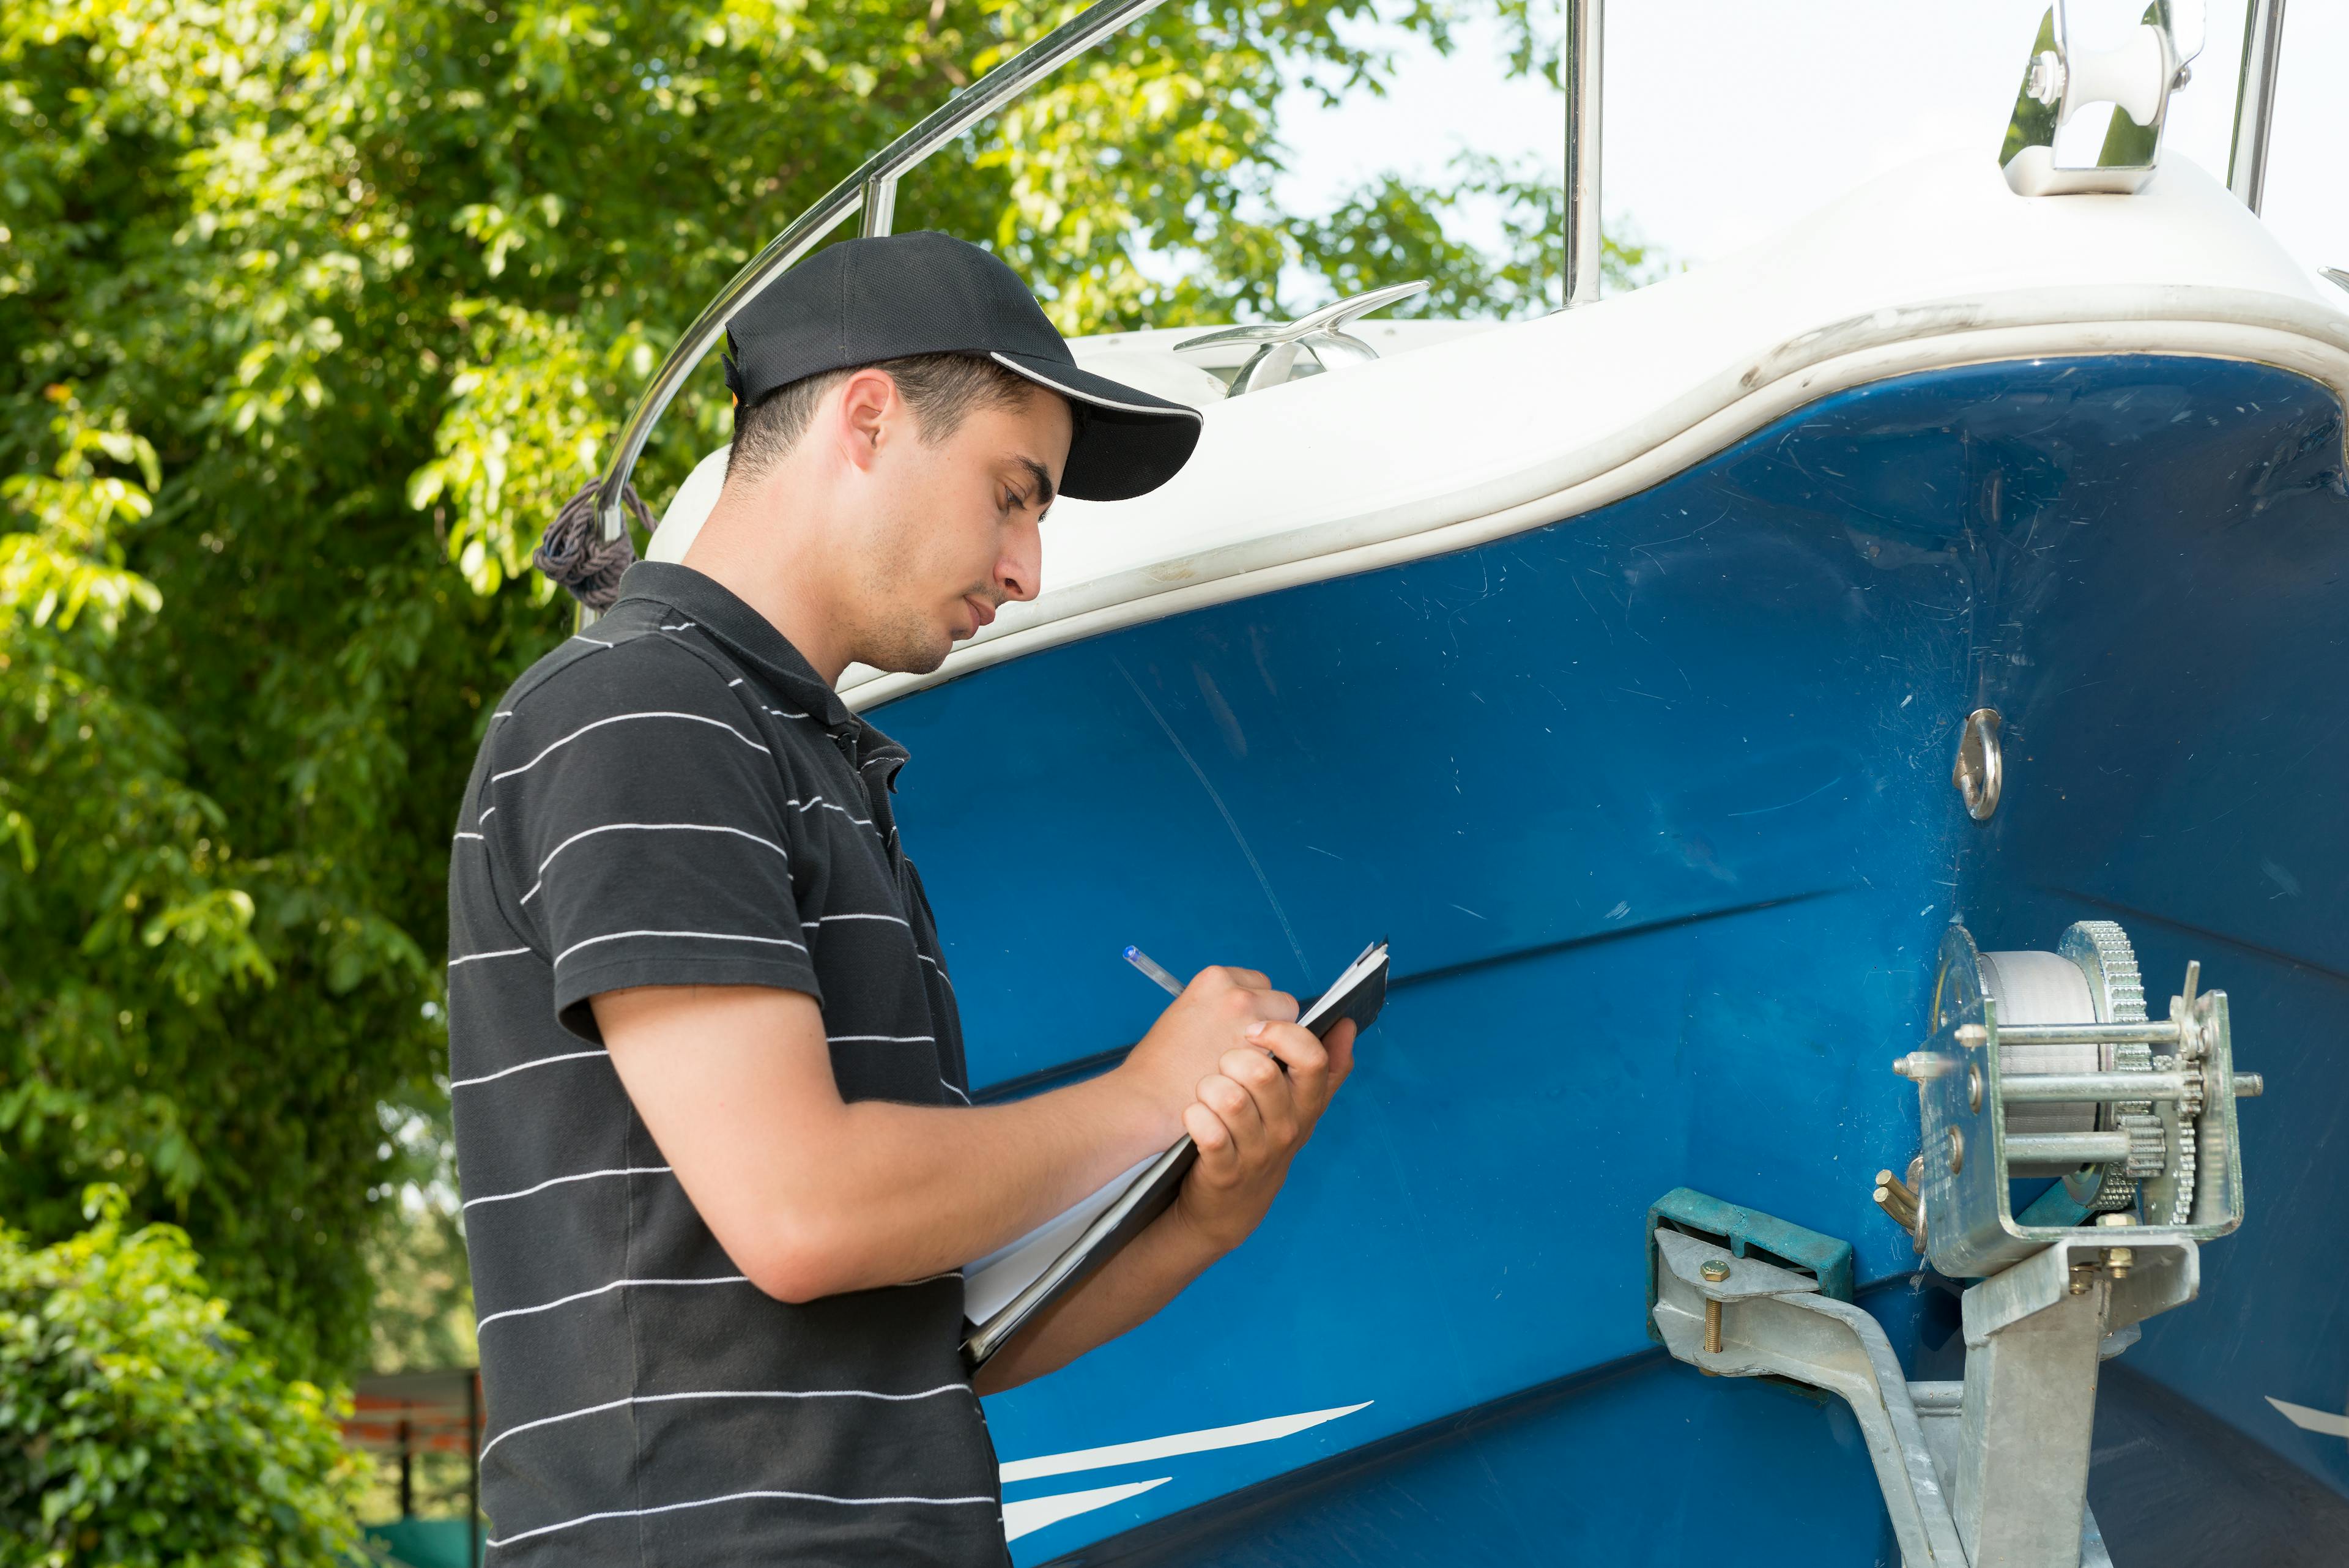 Find boatyard inspections today with Boaters List